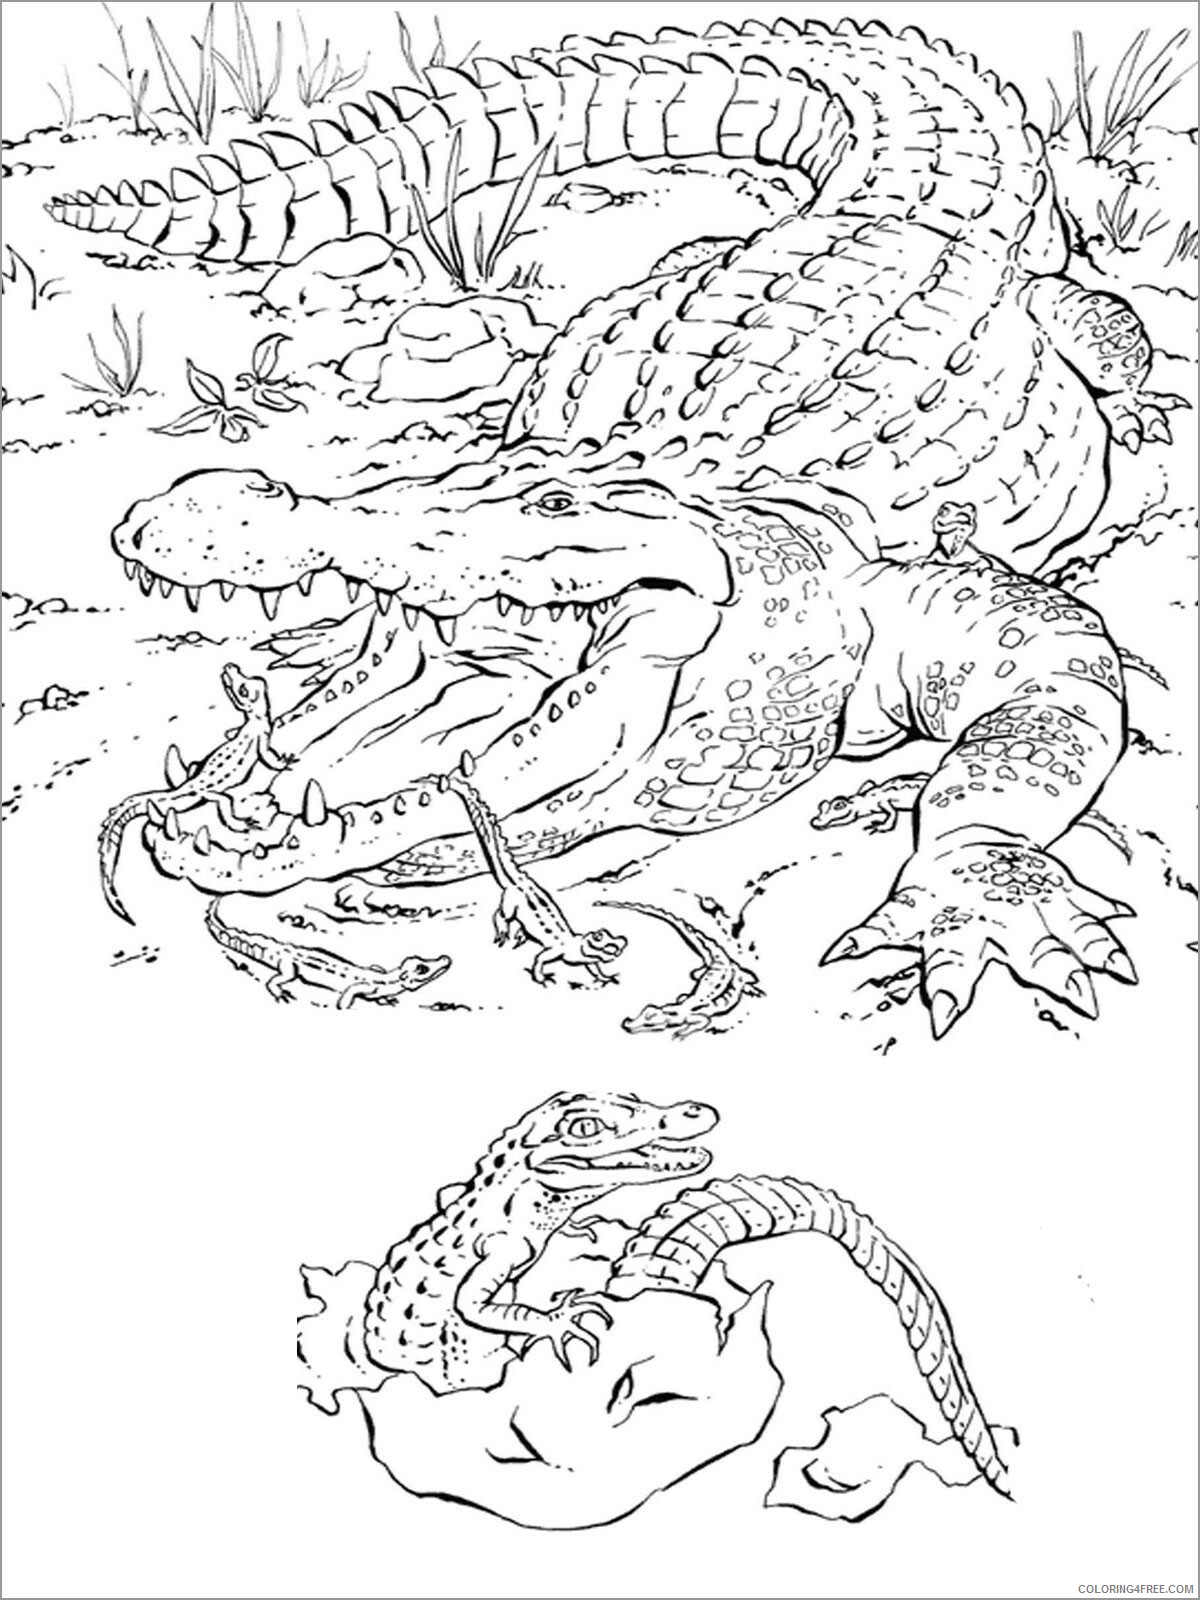 Download Crocodile Coloring Pages Animal Printable Sheets Realistic African Crocodile 2021 1328 Coloring4free Coloring4free Com